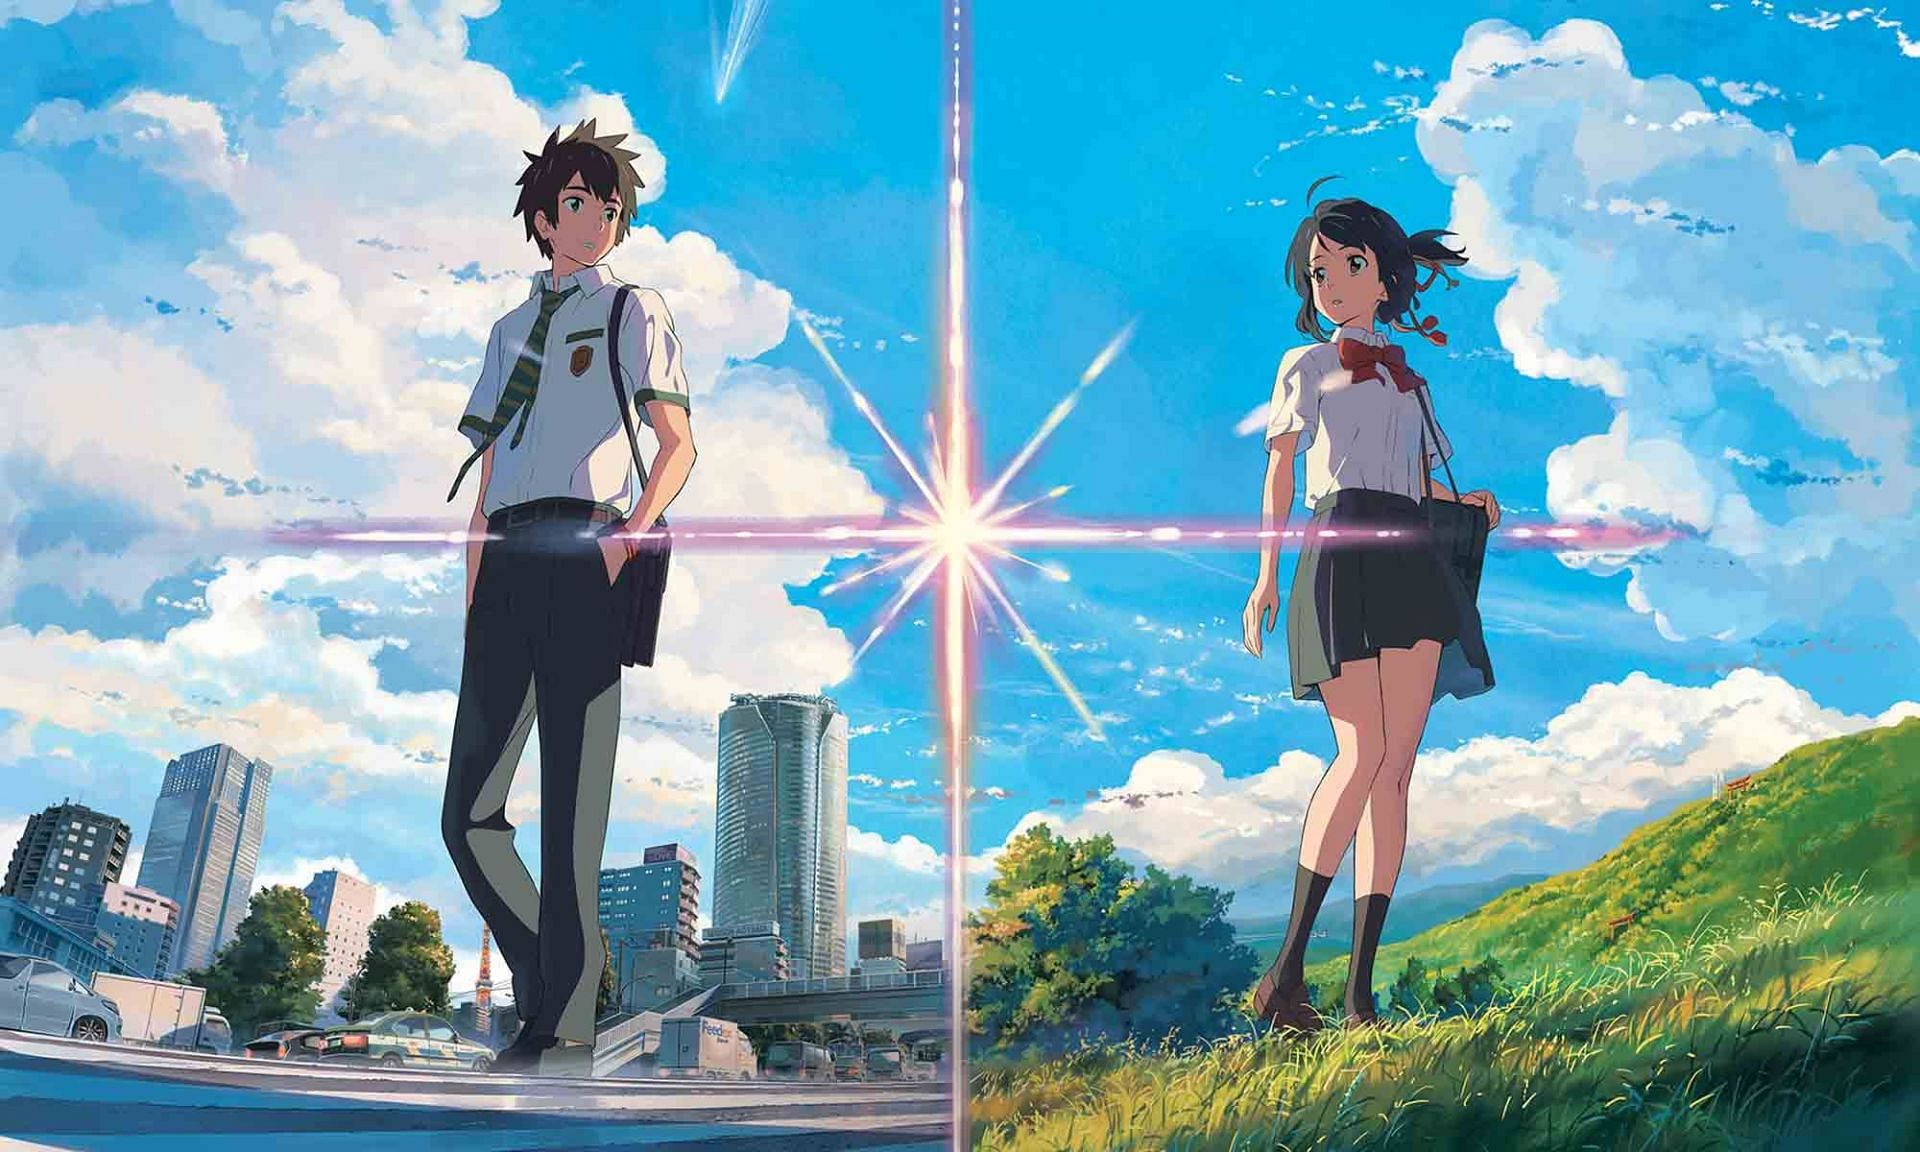 Your Name will be the first movie that will be filmed during the Makoto Shinkai Film Festival (Image via CoMix Wave Films)